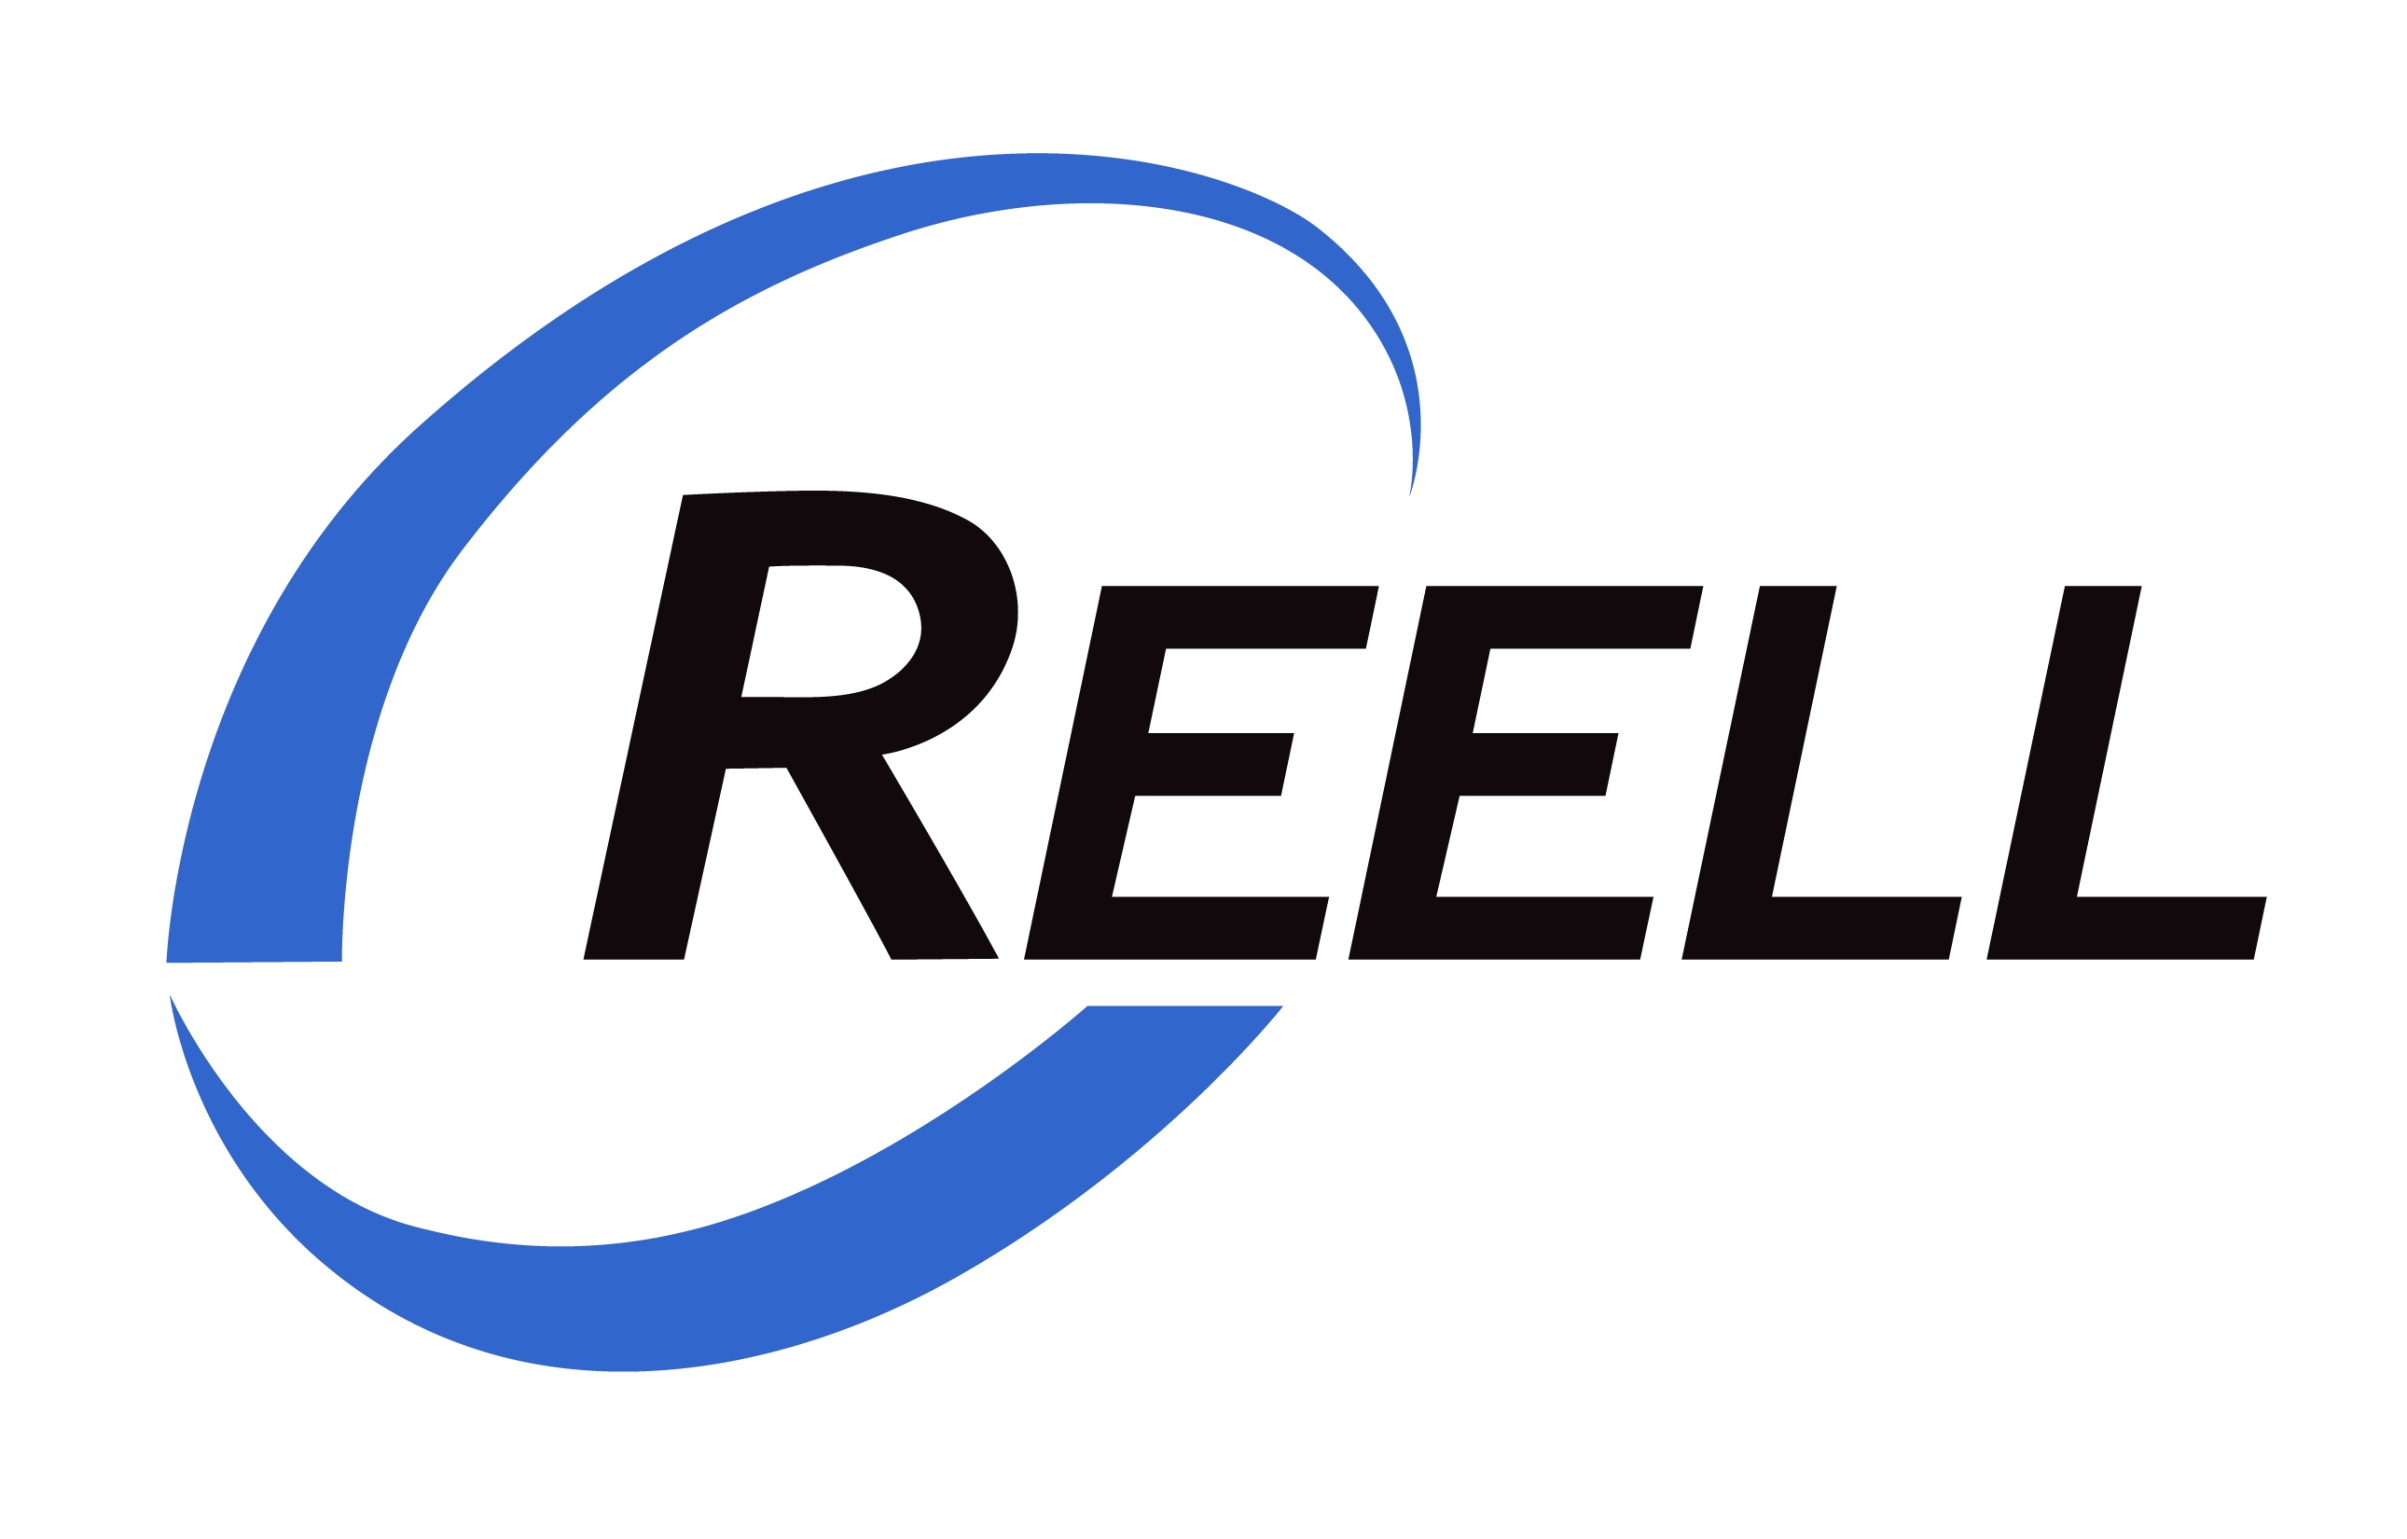 Reell Logo.png